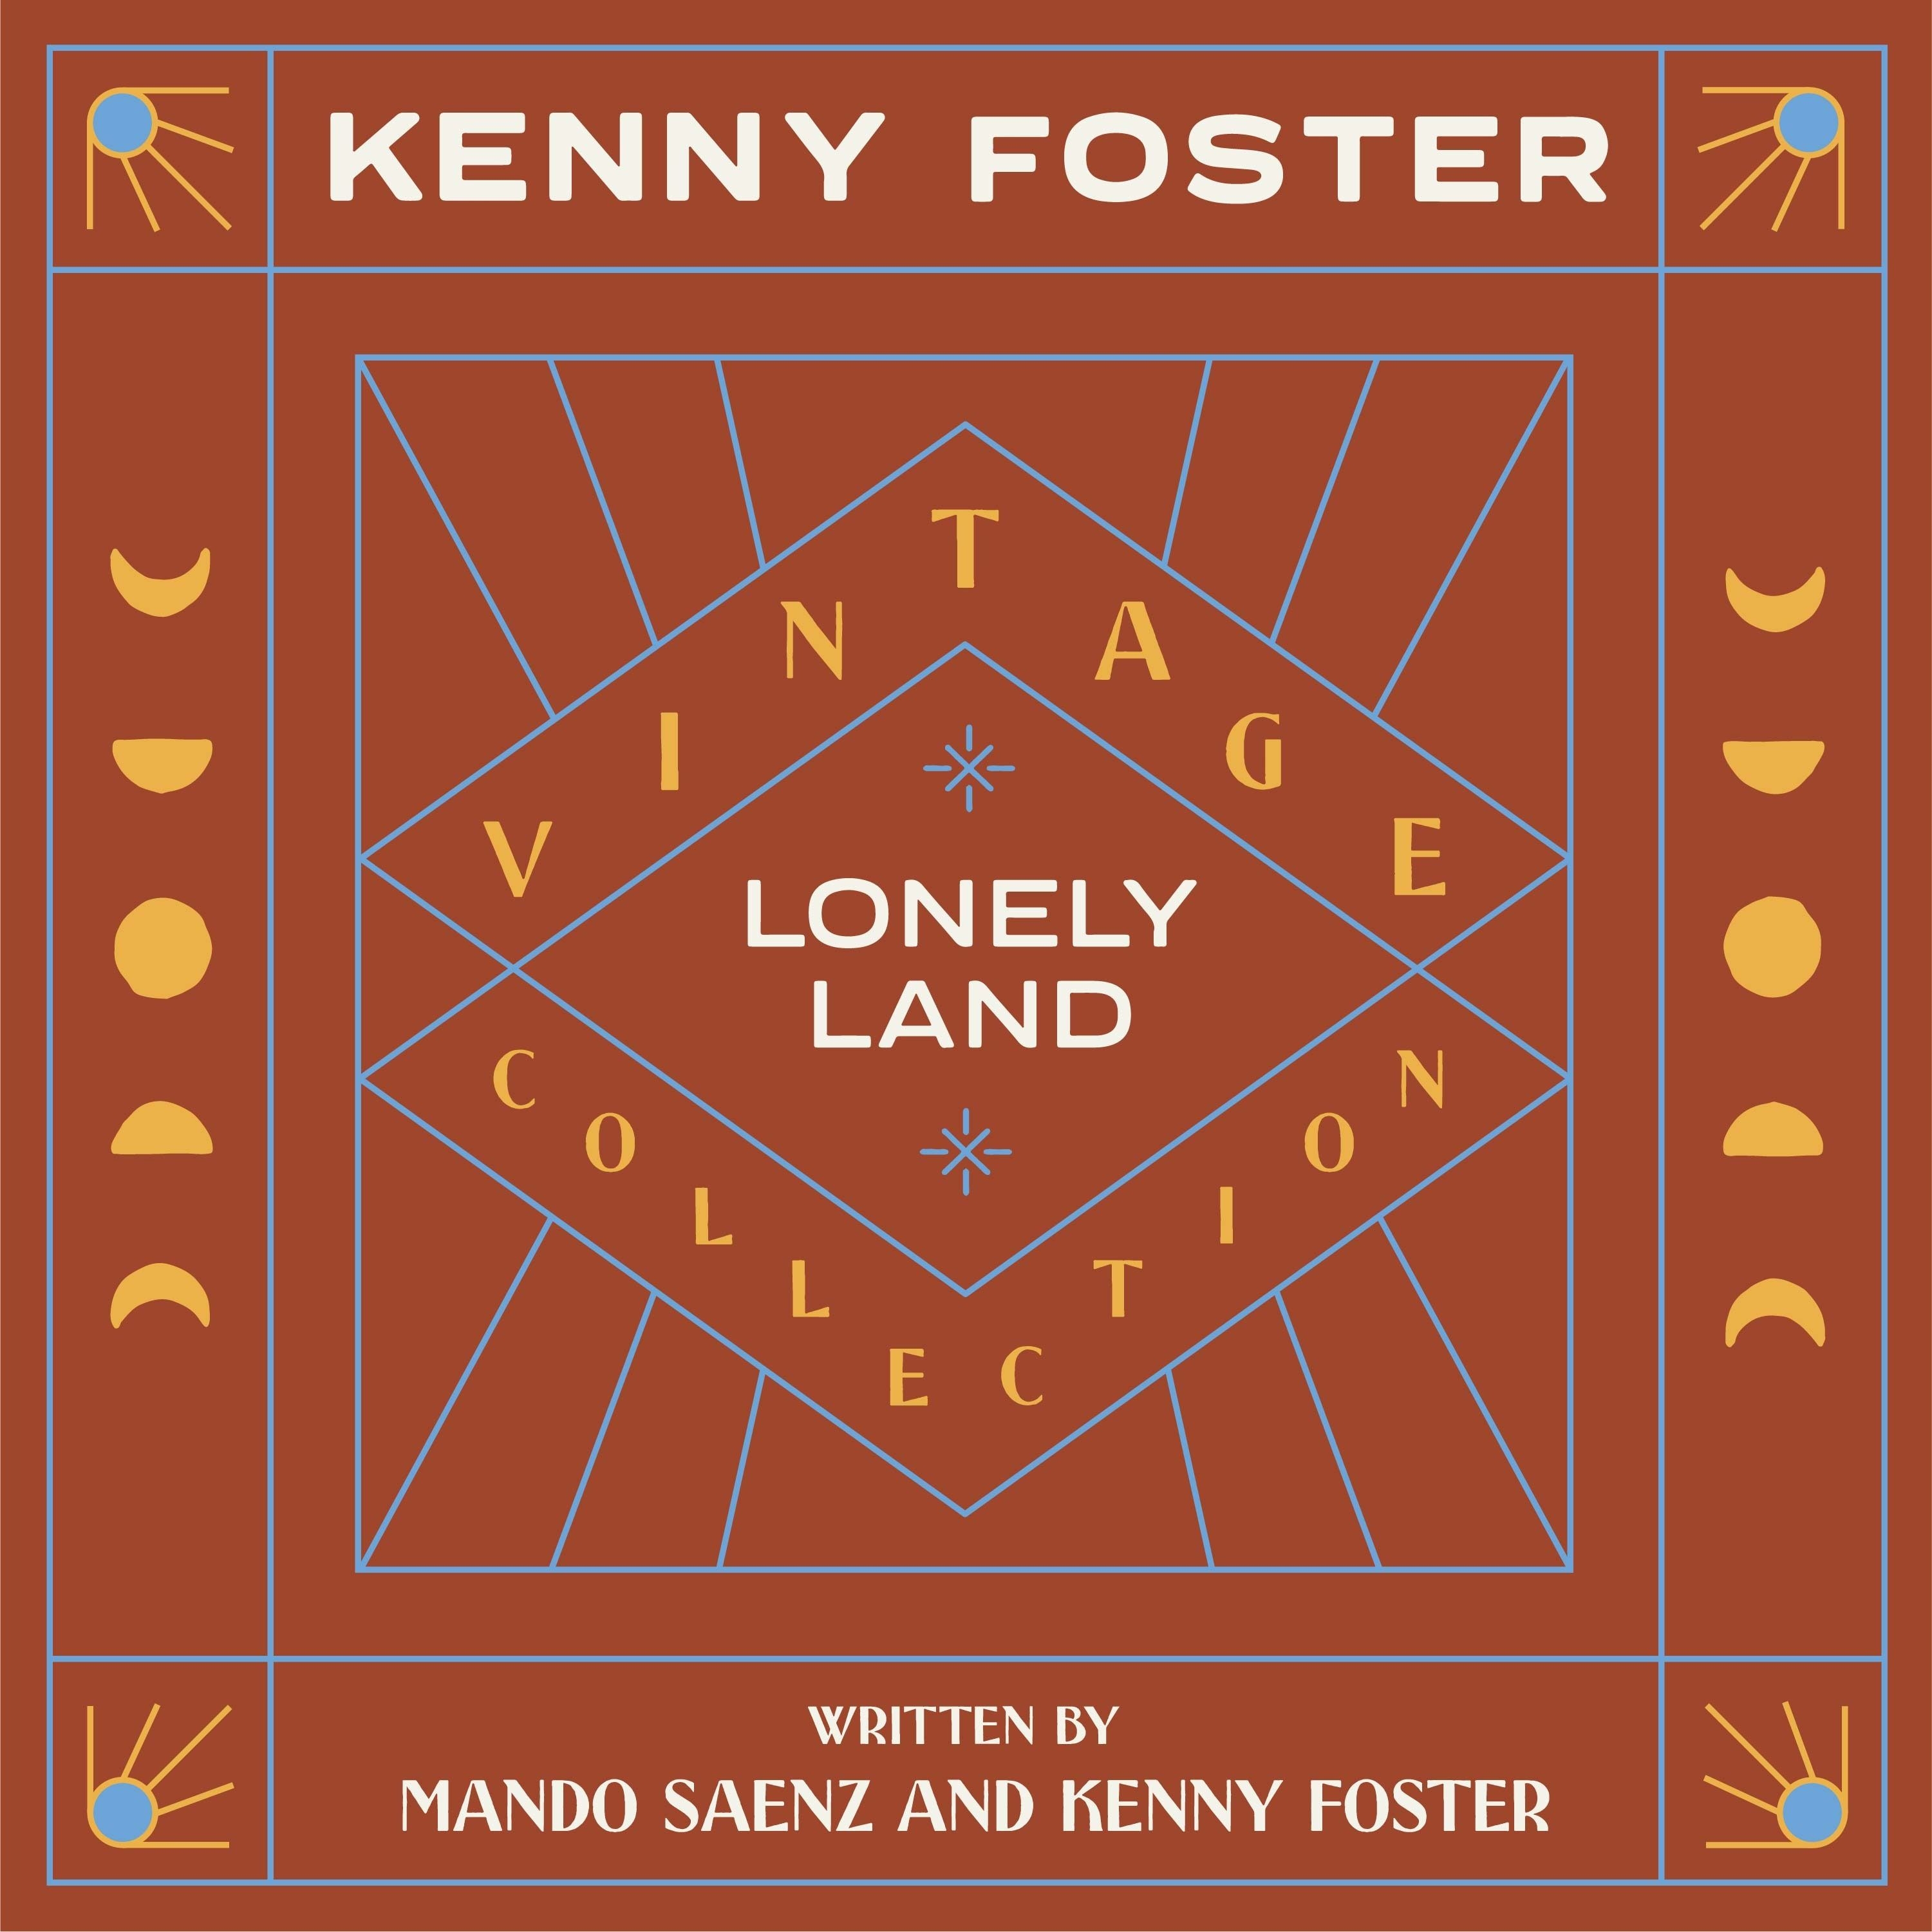 Kenny Foster